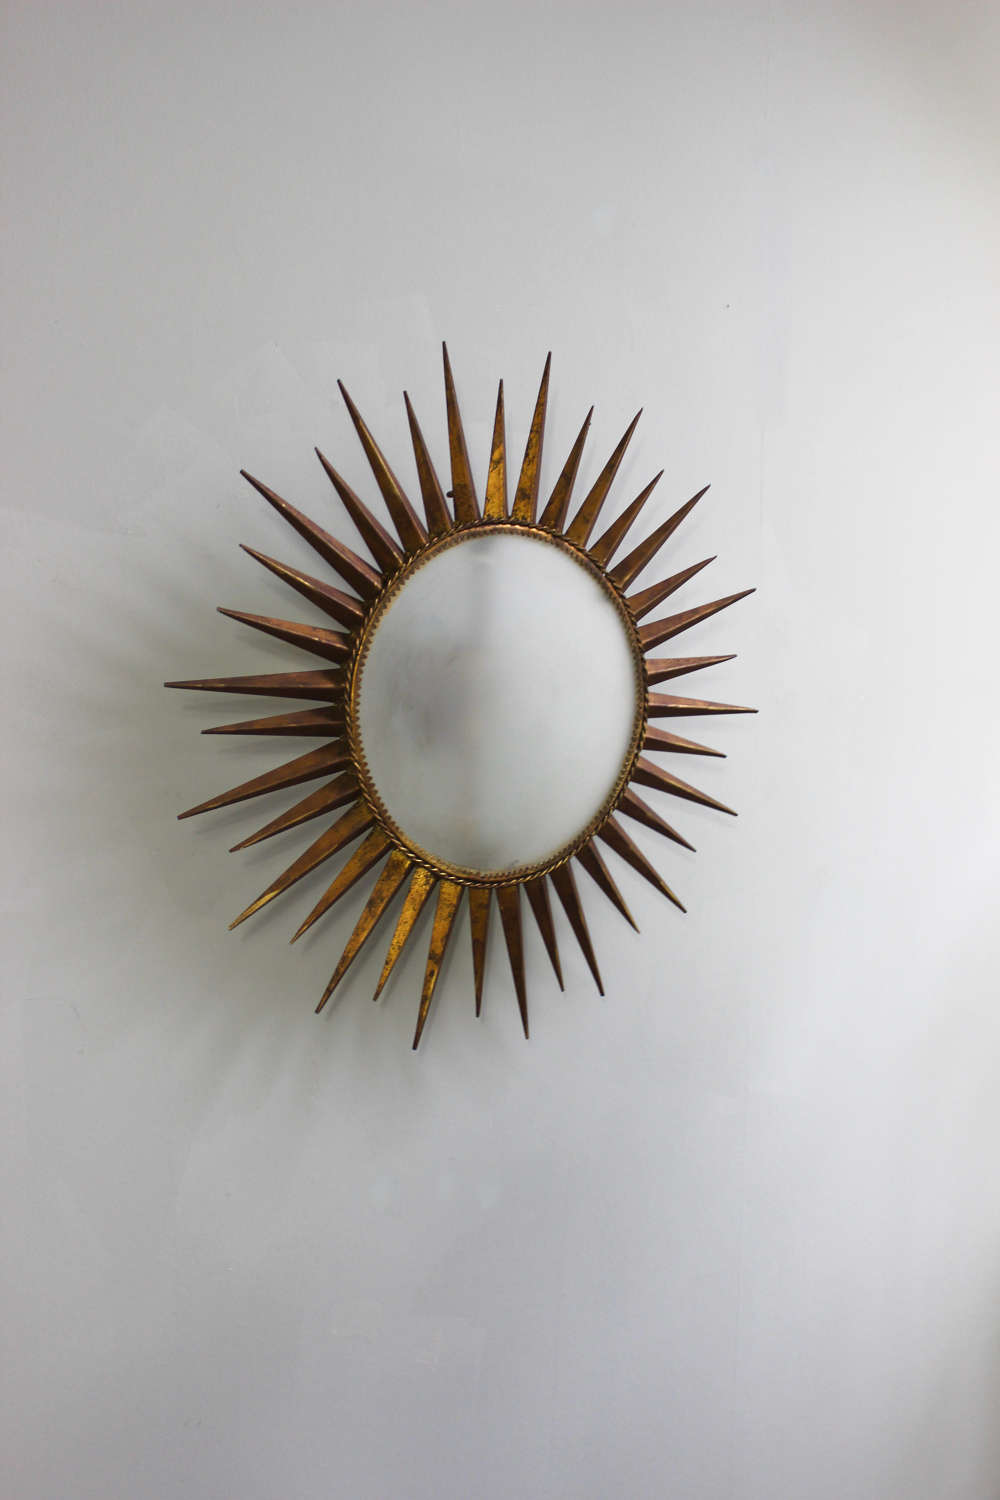 Circular Spanish ceiling/wall light with etched glass